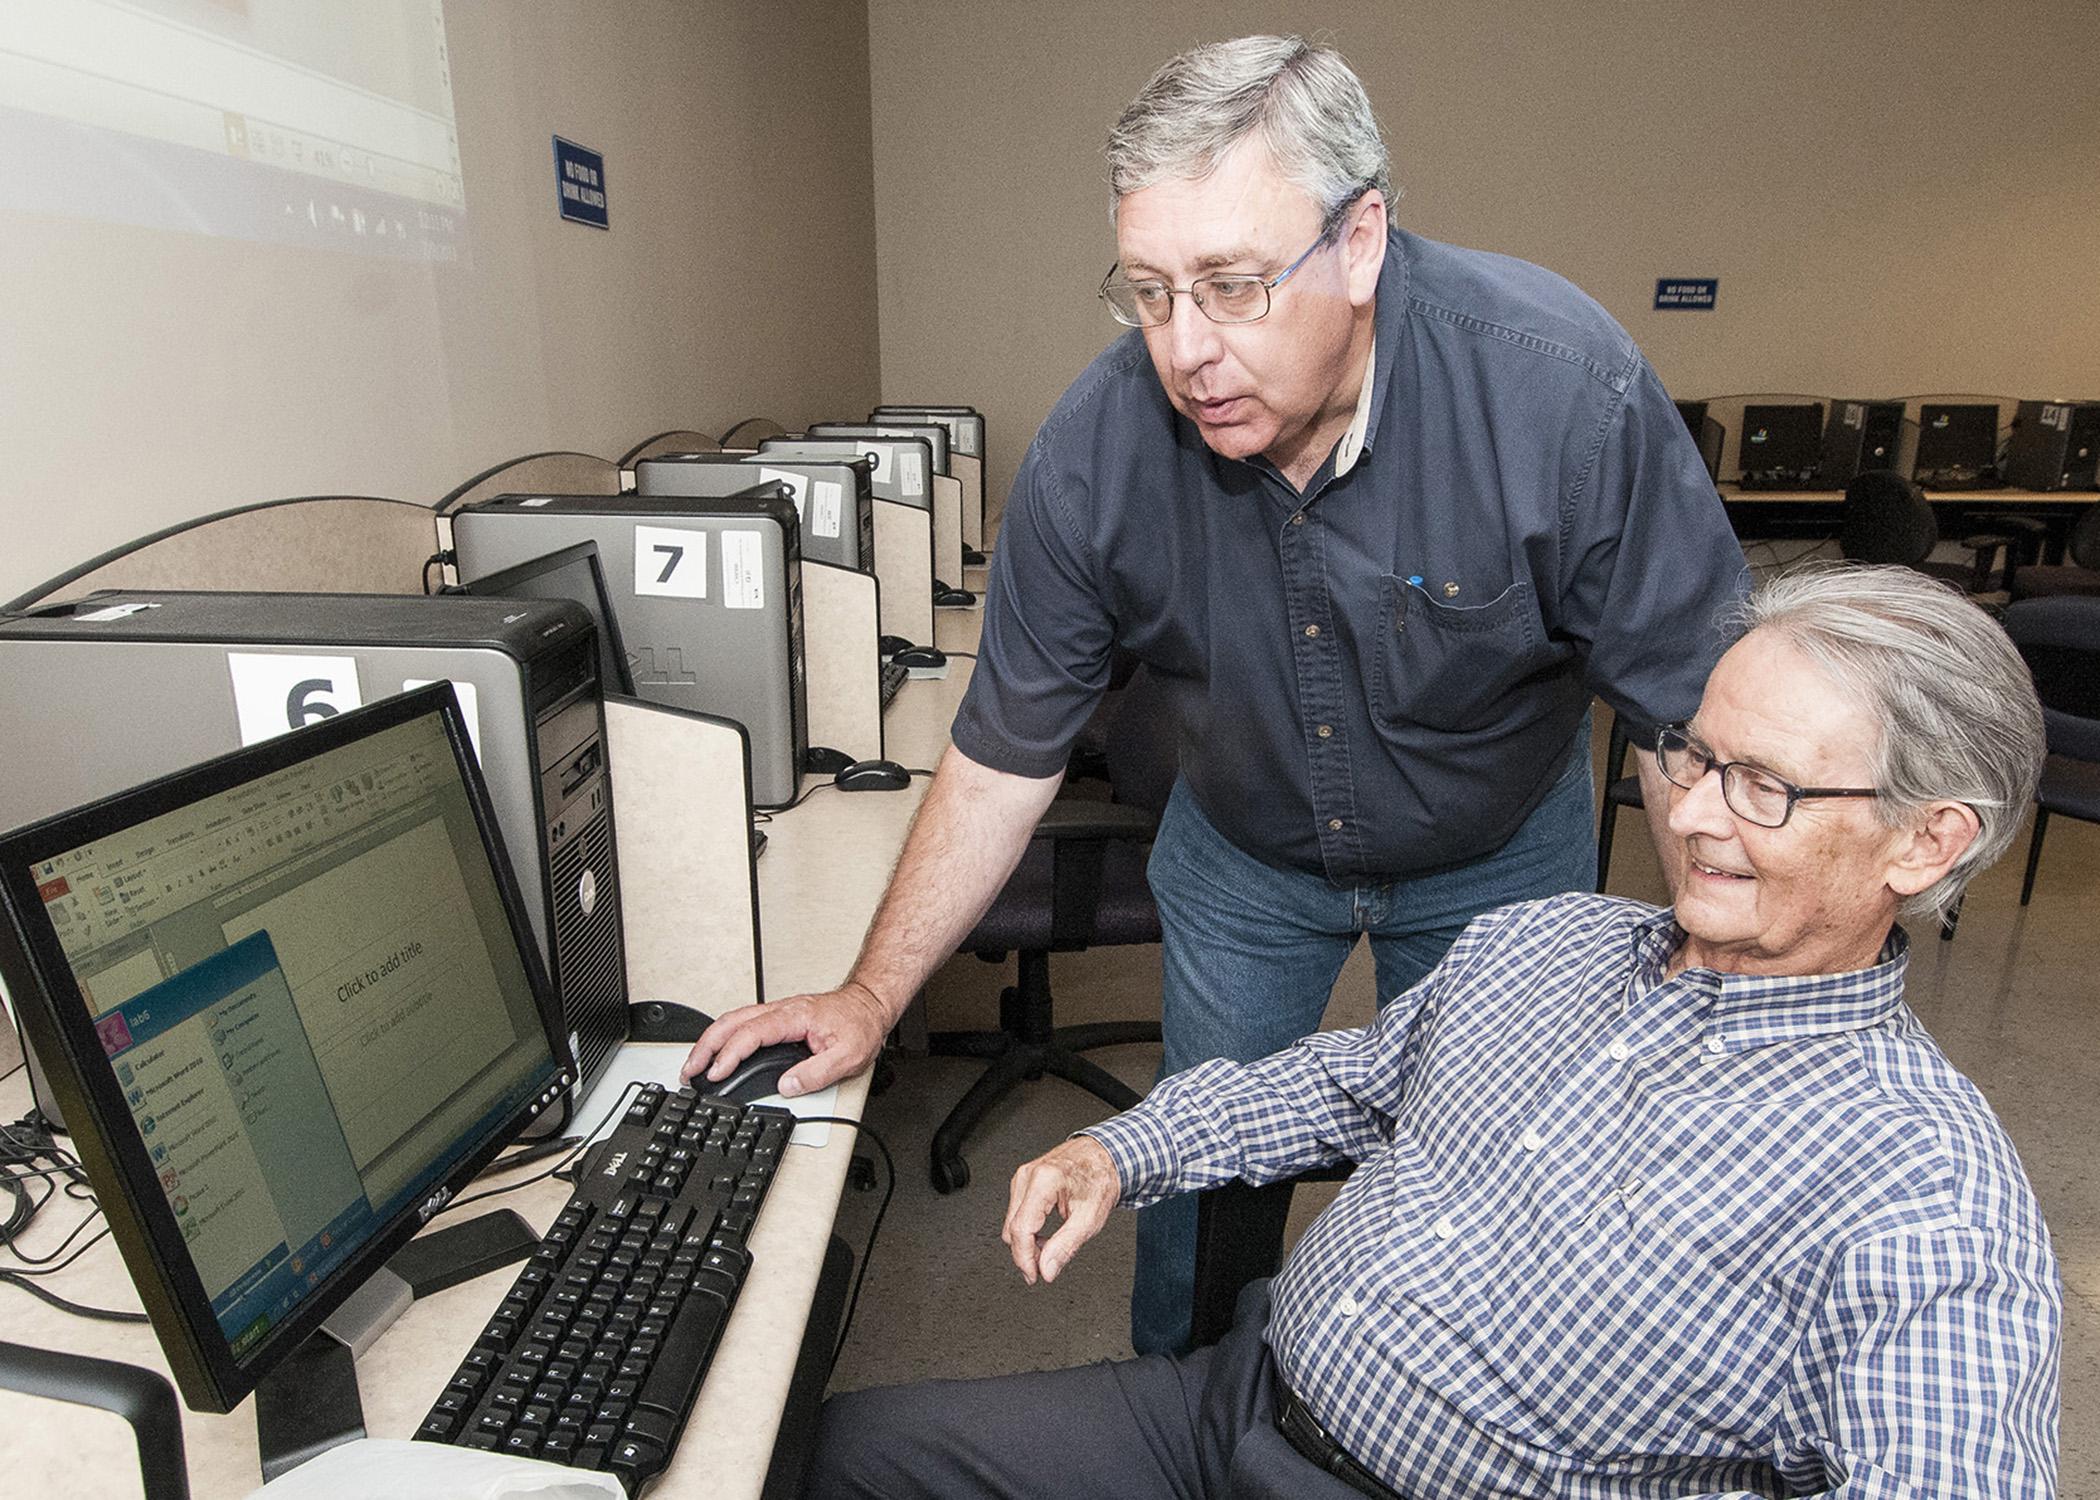 As part of an ongoing program of computer skills workshops, John Giesemann with the Mississippi State University Extension Service Center for Technology Outreach shows Vern Boothe how to access a slideshow program at the WIN Job Center in Madison on July 9, 2013. (File photo by MSU Ag Communications/Scott Corey)